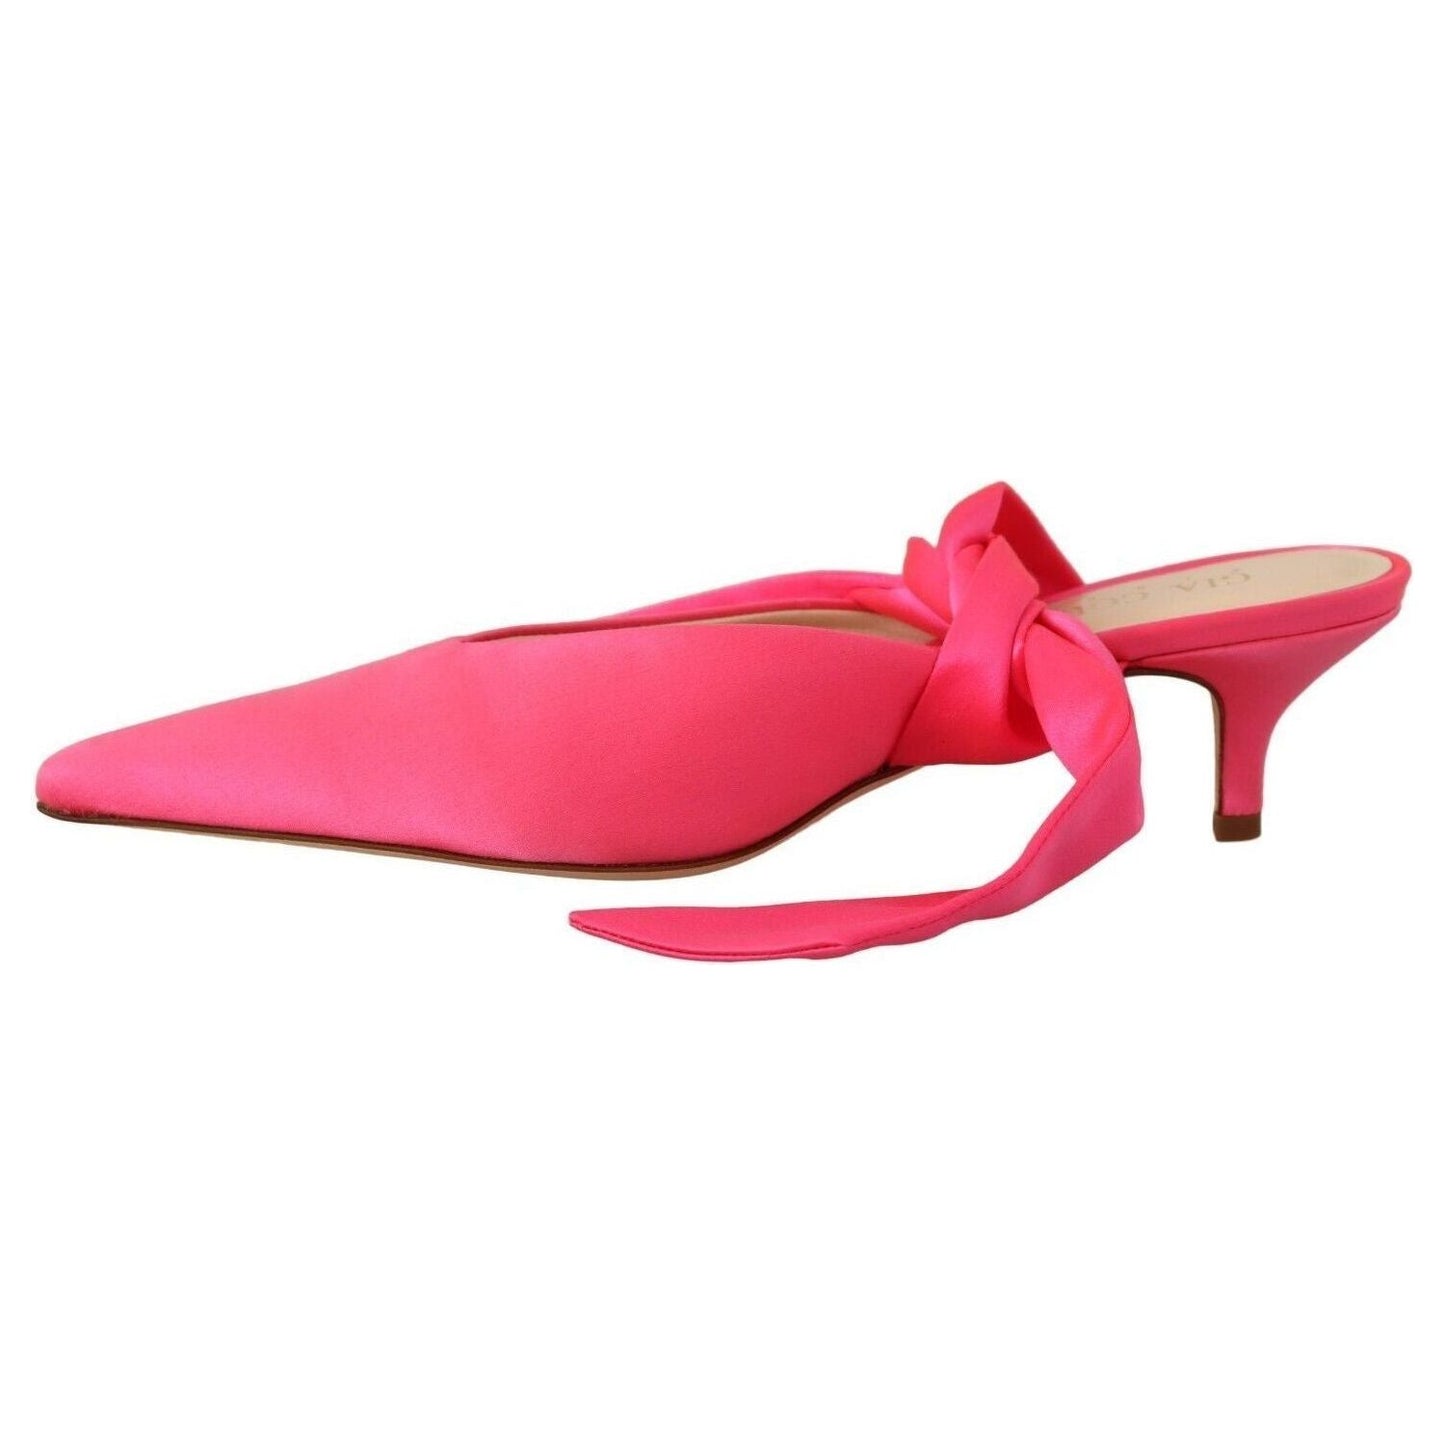 GIA COUTURE Chic Pink Kitten Heels for Elegant Evenings pink-leather-lace-up-kitten-heels-pumps-shoes